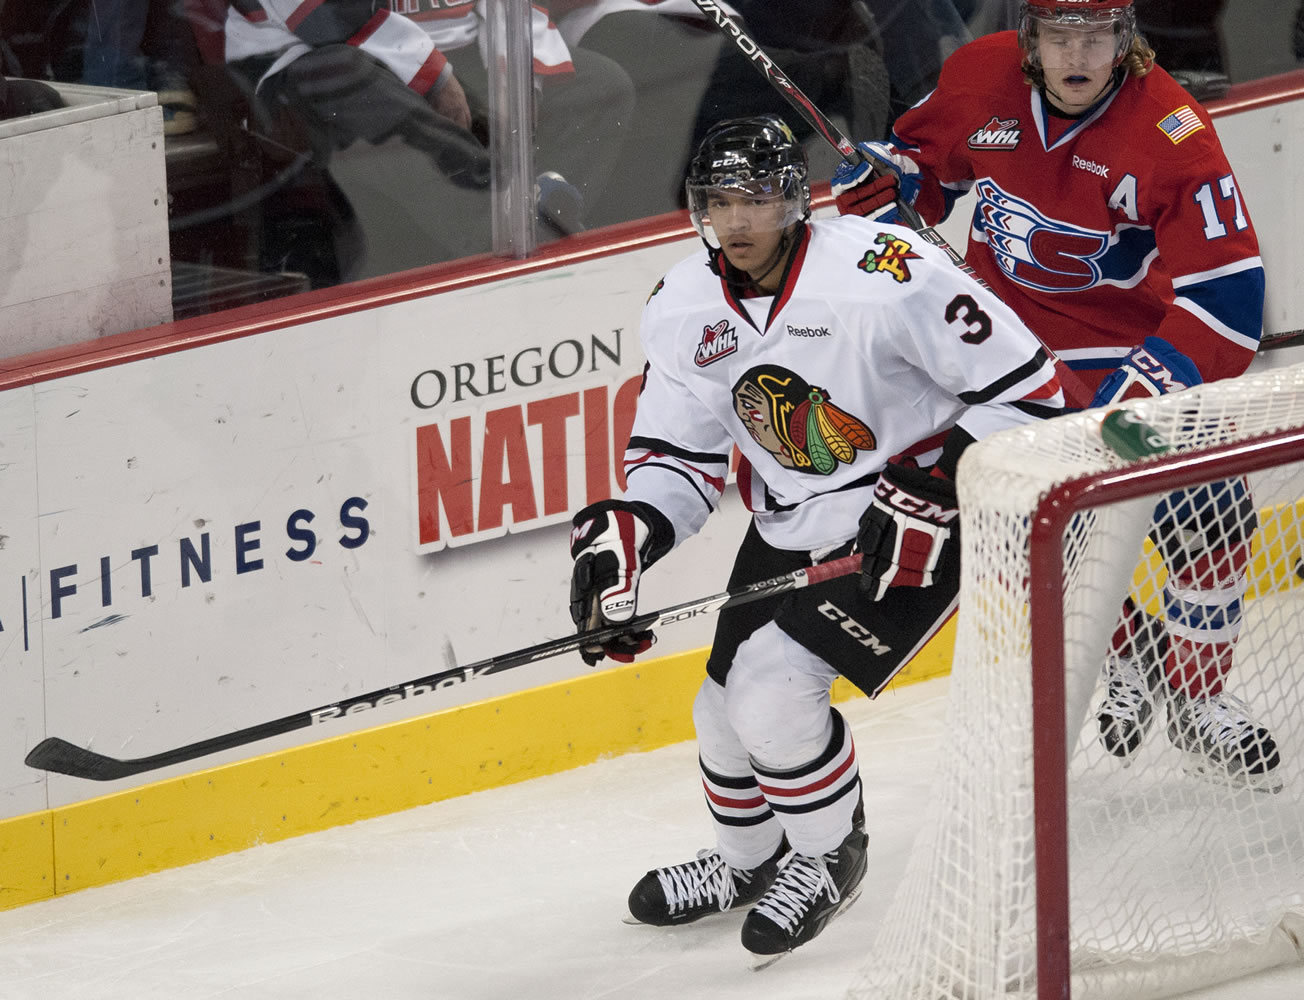 Portland Winterhawks' defenseman Seth Jones is projected to be the first American-born top NHL draft pick since 2007 and only the second defenseman in 16 years to be picked No.